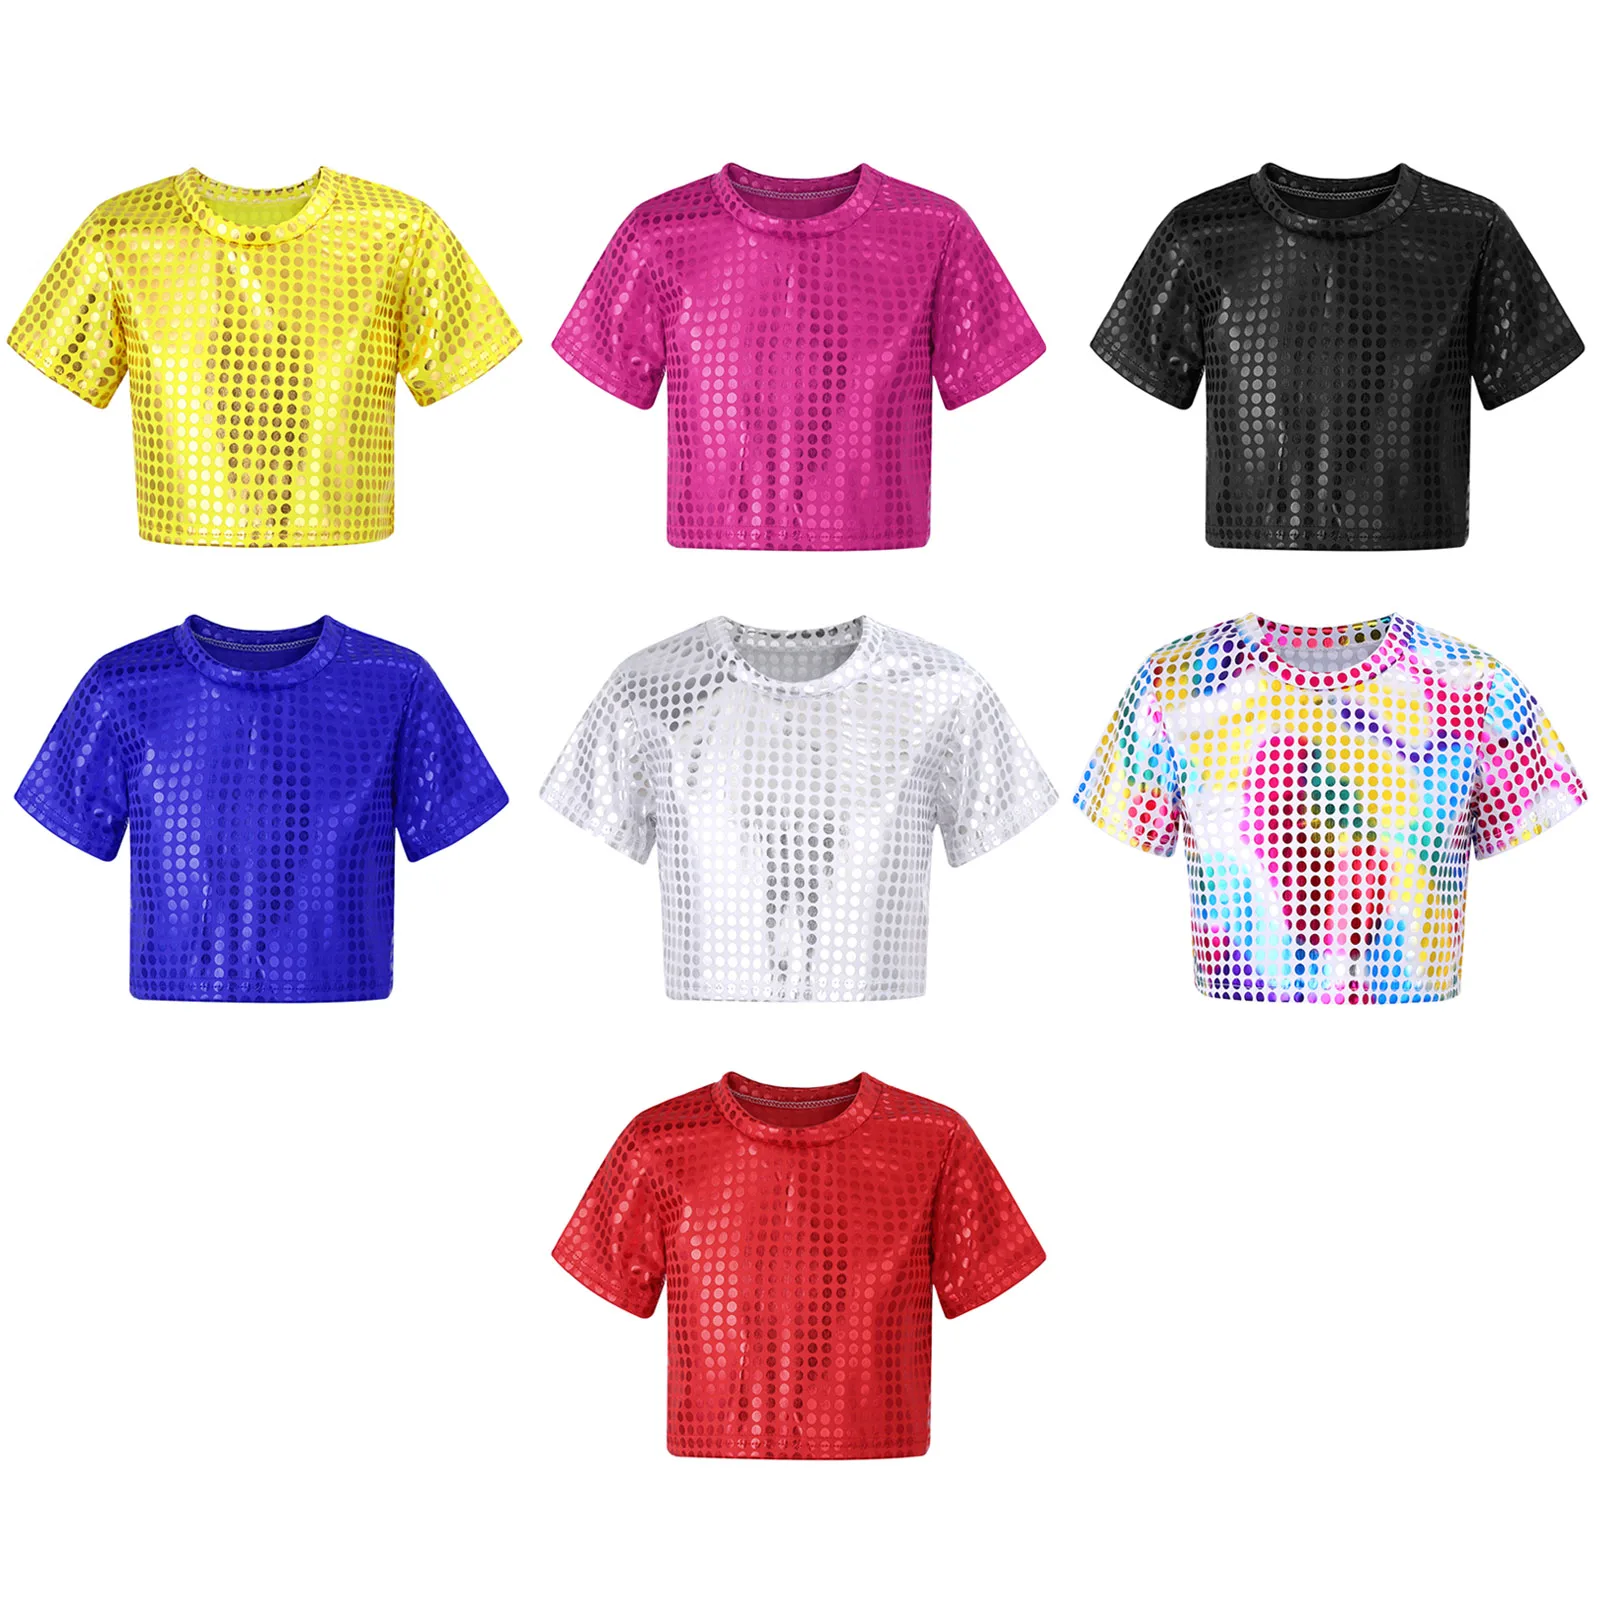 Jazz Dance Costumes Kids Boys Girls Shiny Sequins Short Sleeve Solid Color T-shirt Crop Tops Street Dance Stage Performance Wear